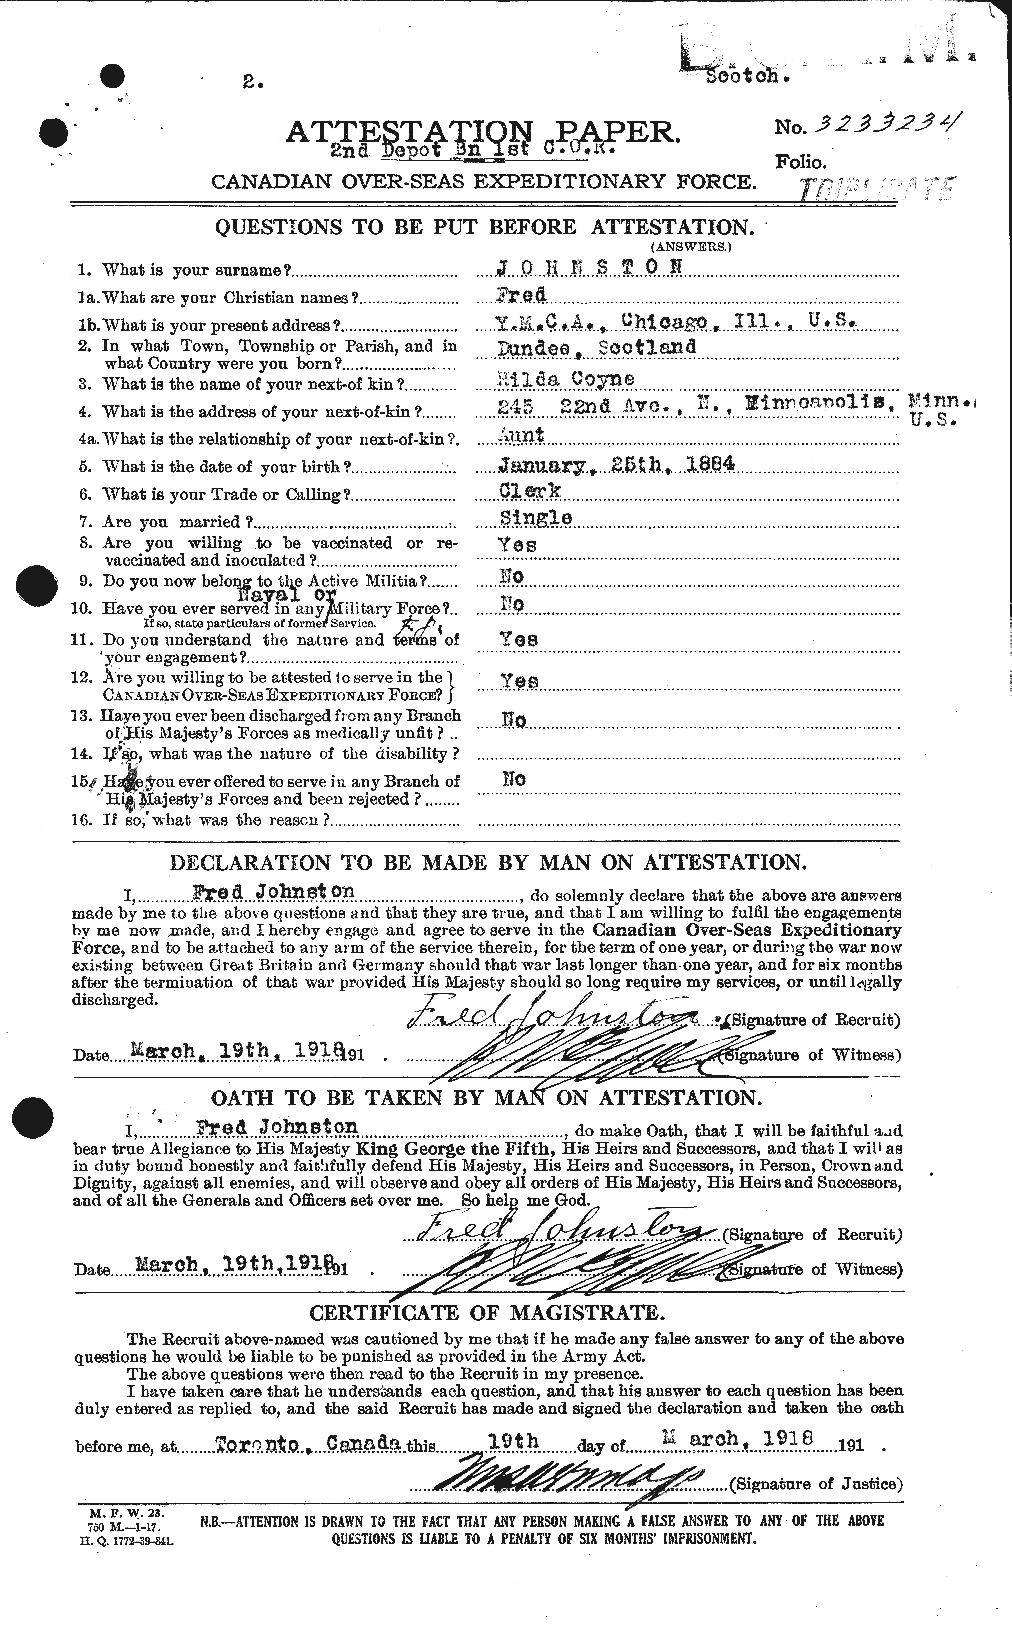 Personnel Records of the First World War - CEF 423284a